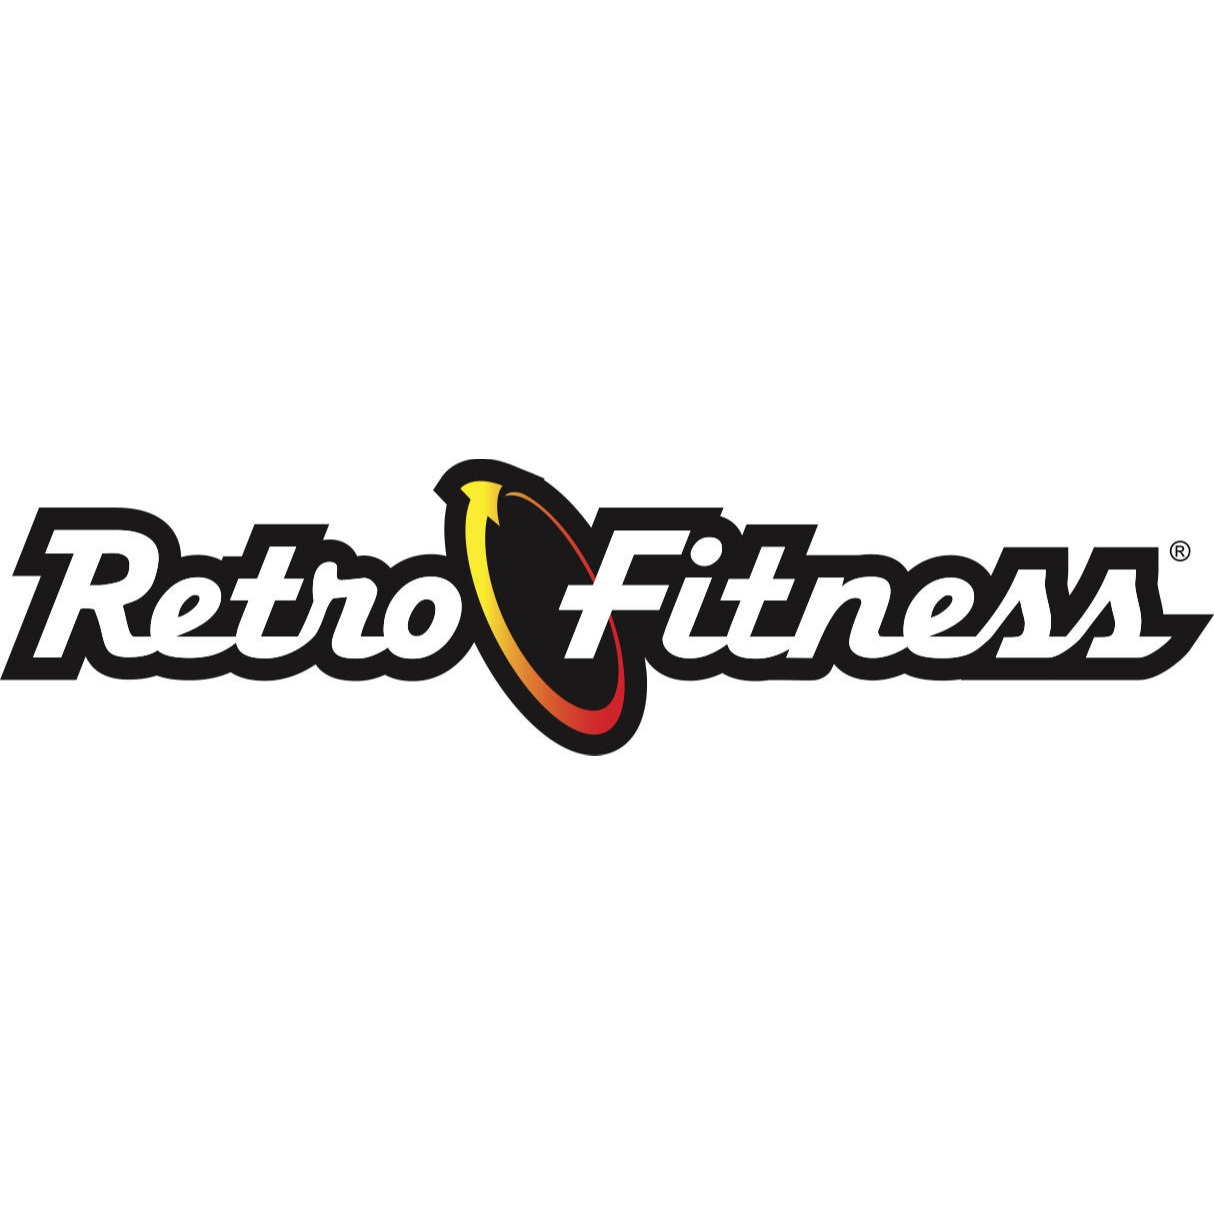 Retro Fitness Coupons near me in Toms River, NJ 08753 ...